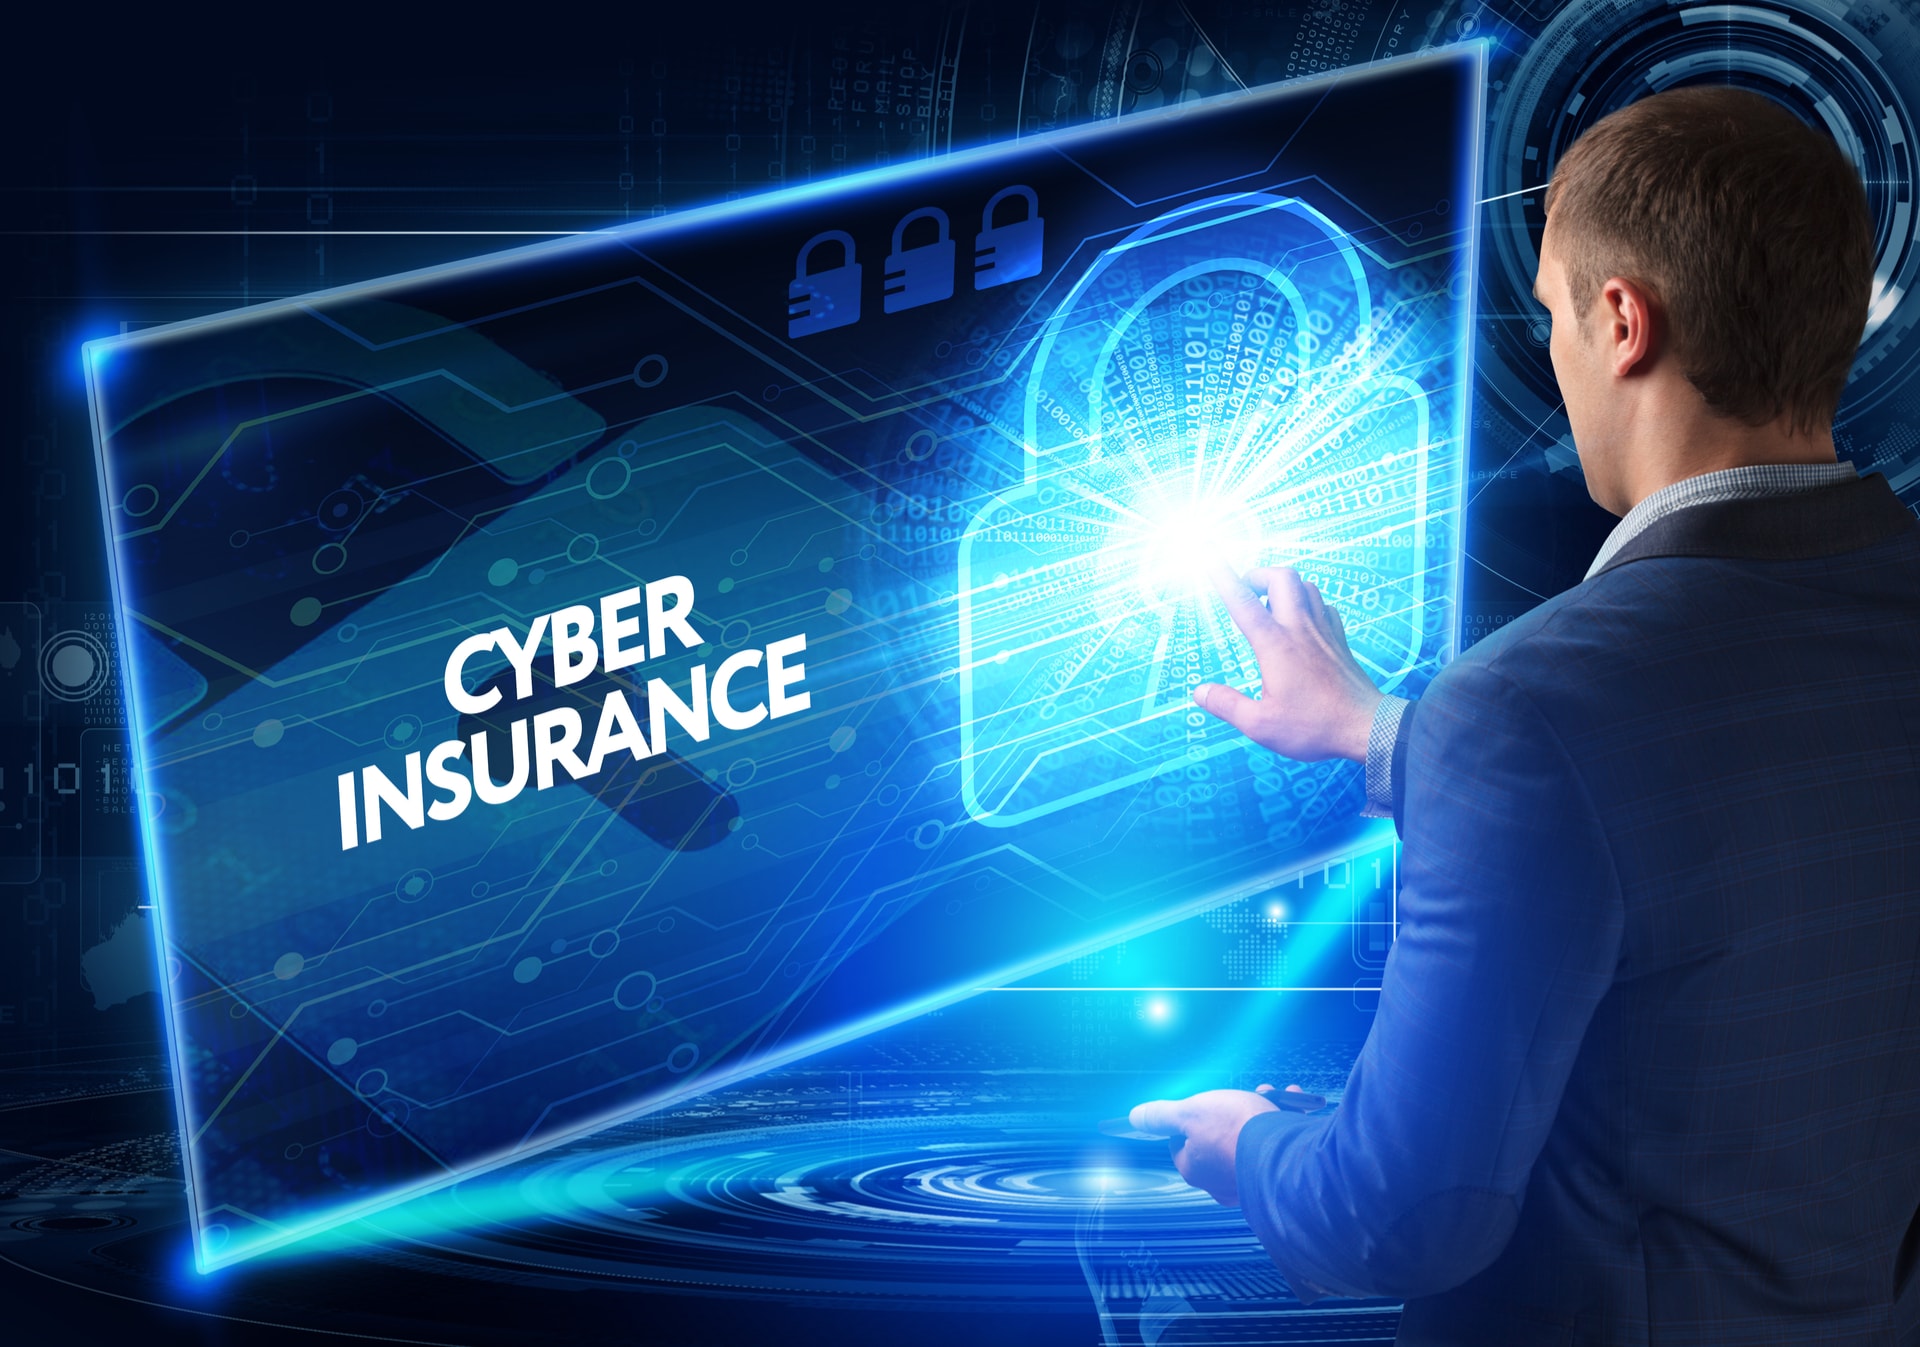 How IT Support Companies Can Help Your Organization Increase Cyber Resilience